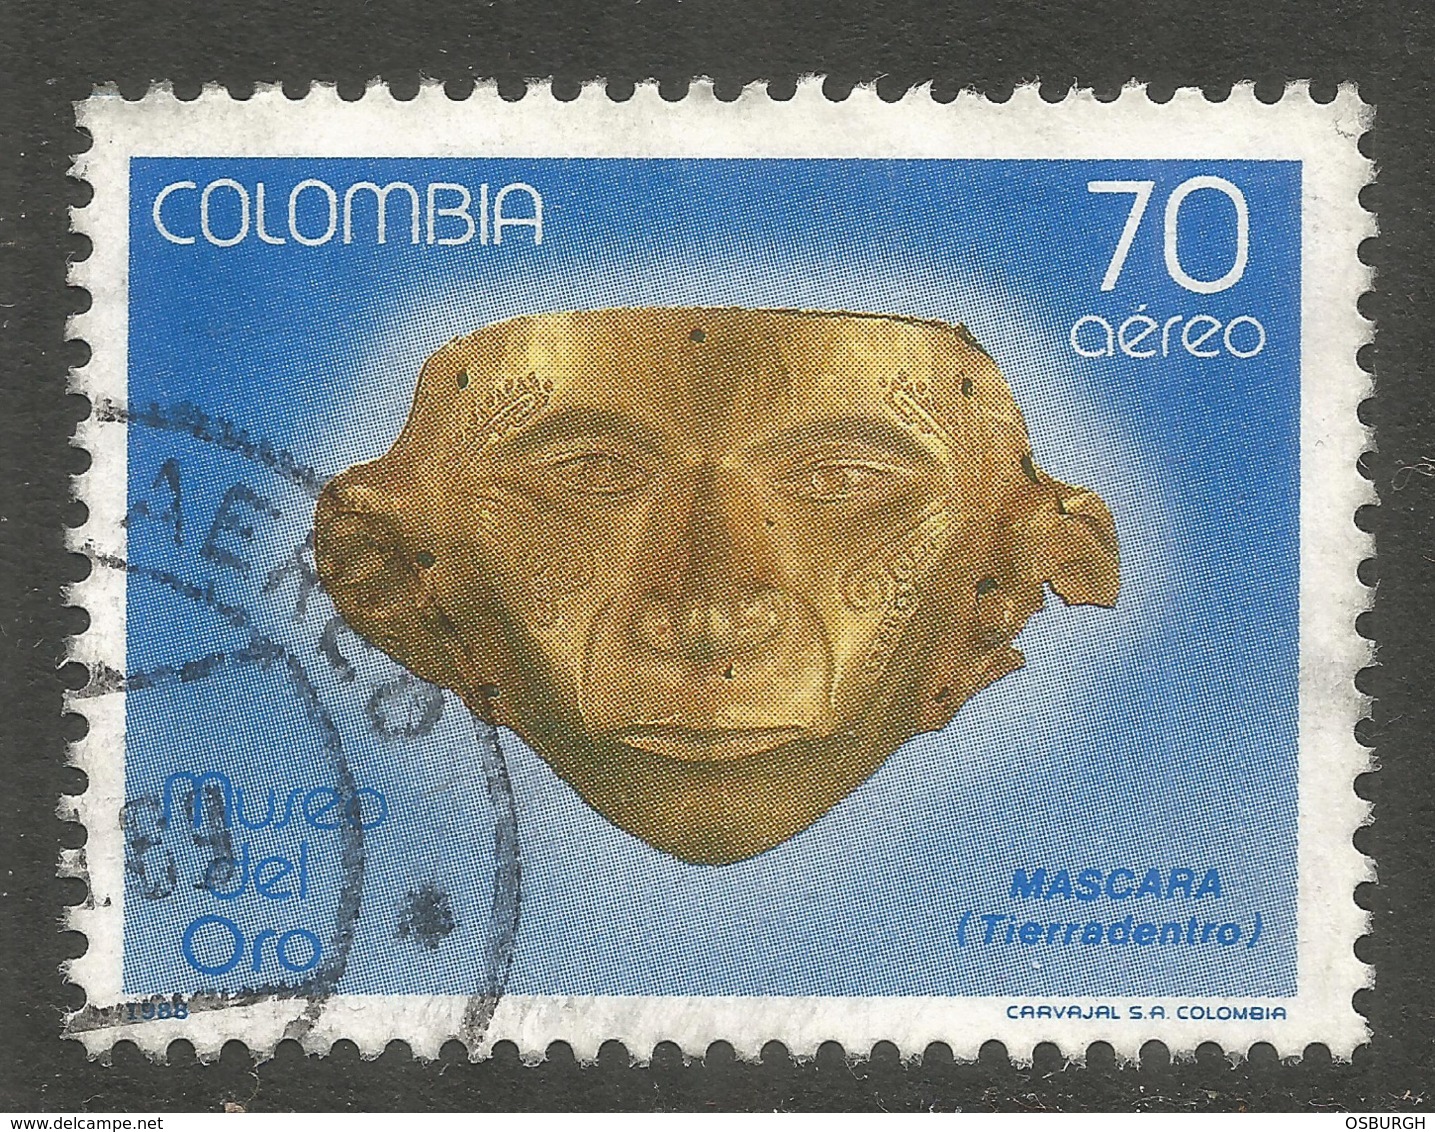 COLOMBIA. 1988. 70 PESO AIR. GOLD MASK. USED - Colombia